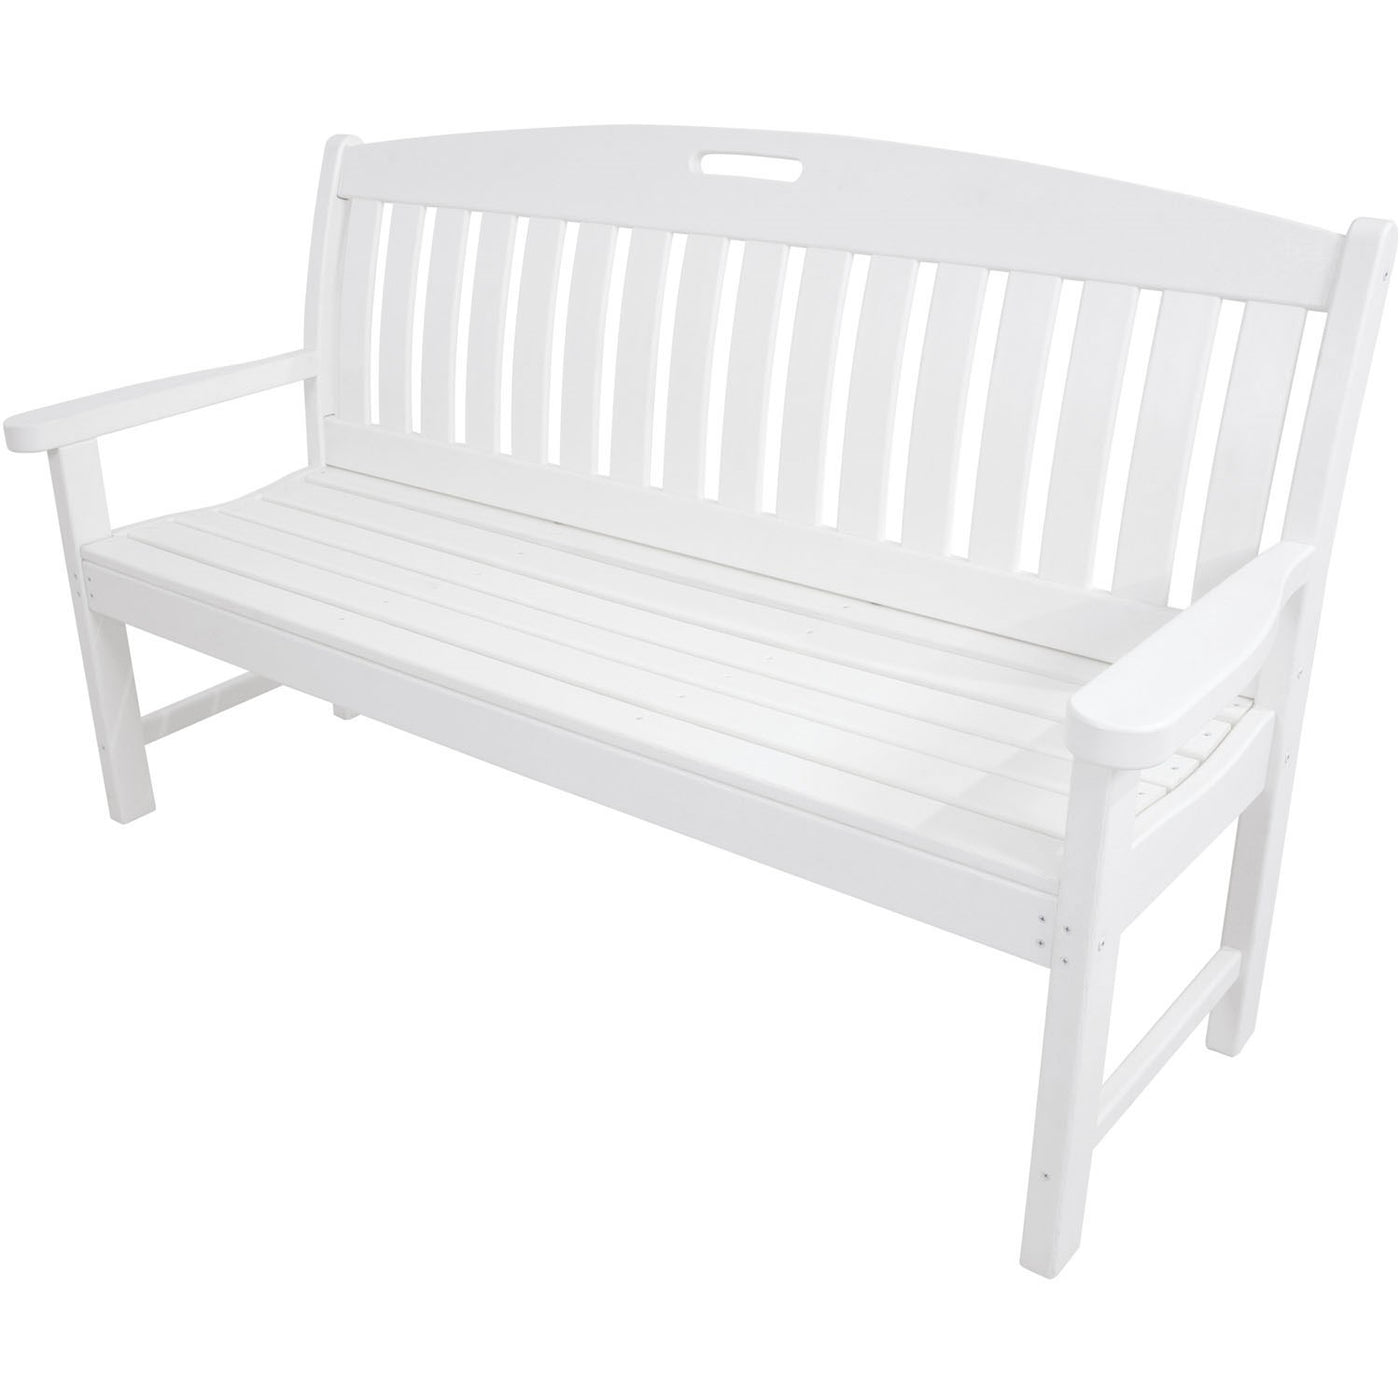 Hanover All-Weather Avalon 60" Porch Bench - White - GreenLivingSupply-Store